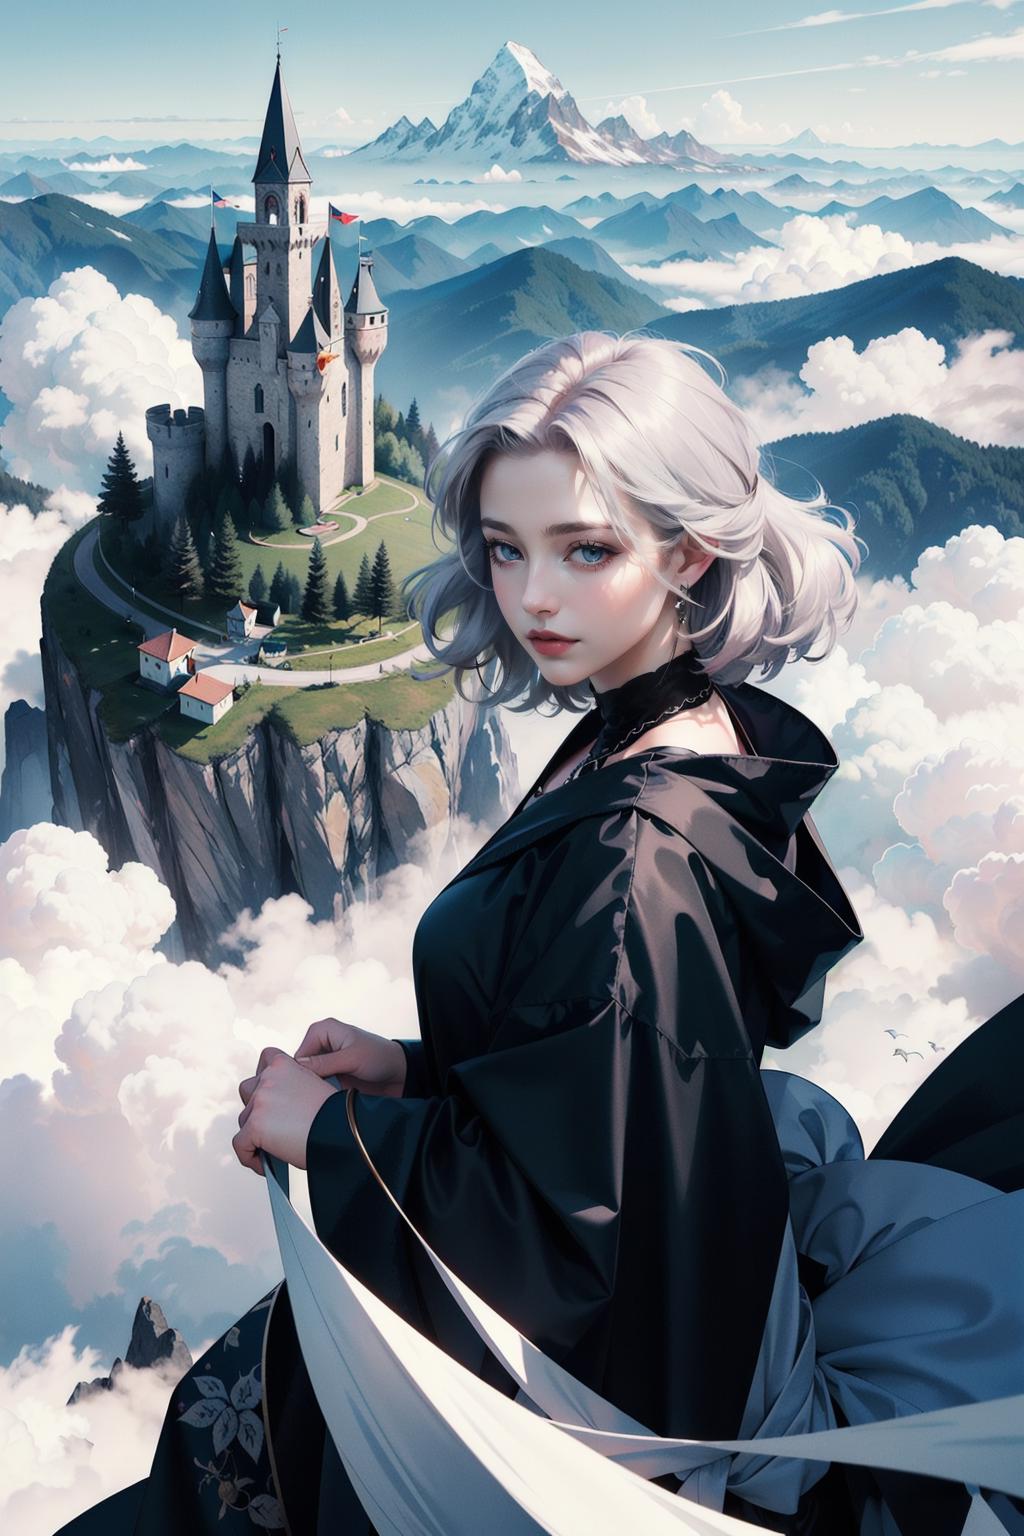 Anime-style drawing of a girl in a black robe standing in front of a castle.